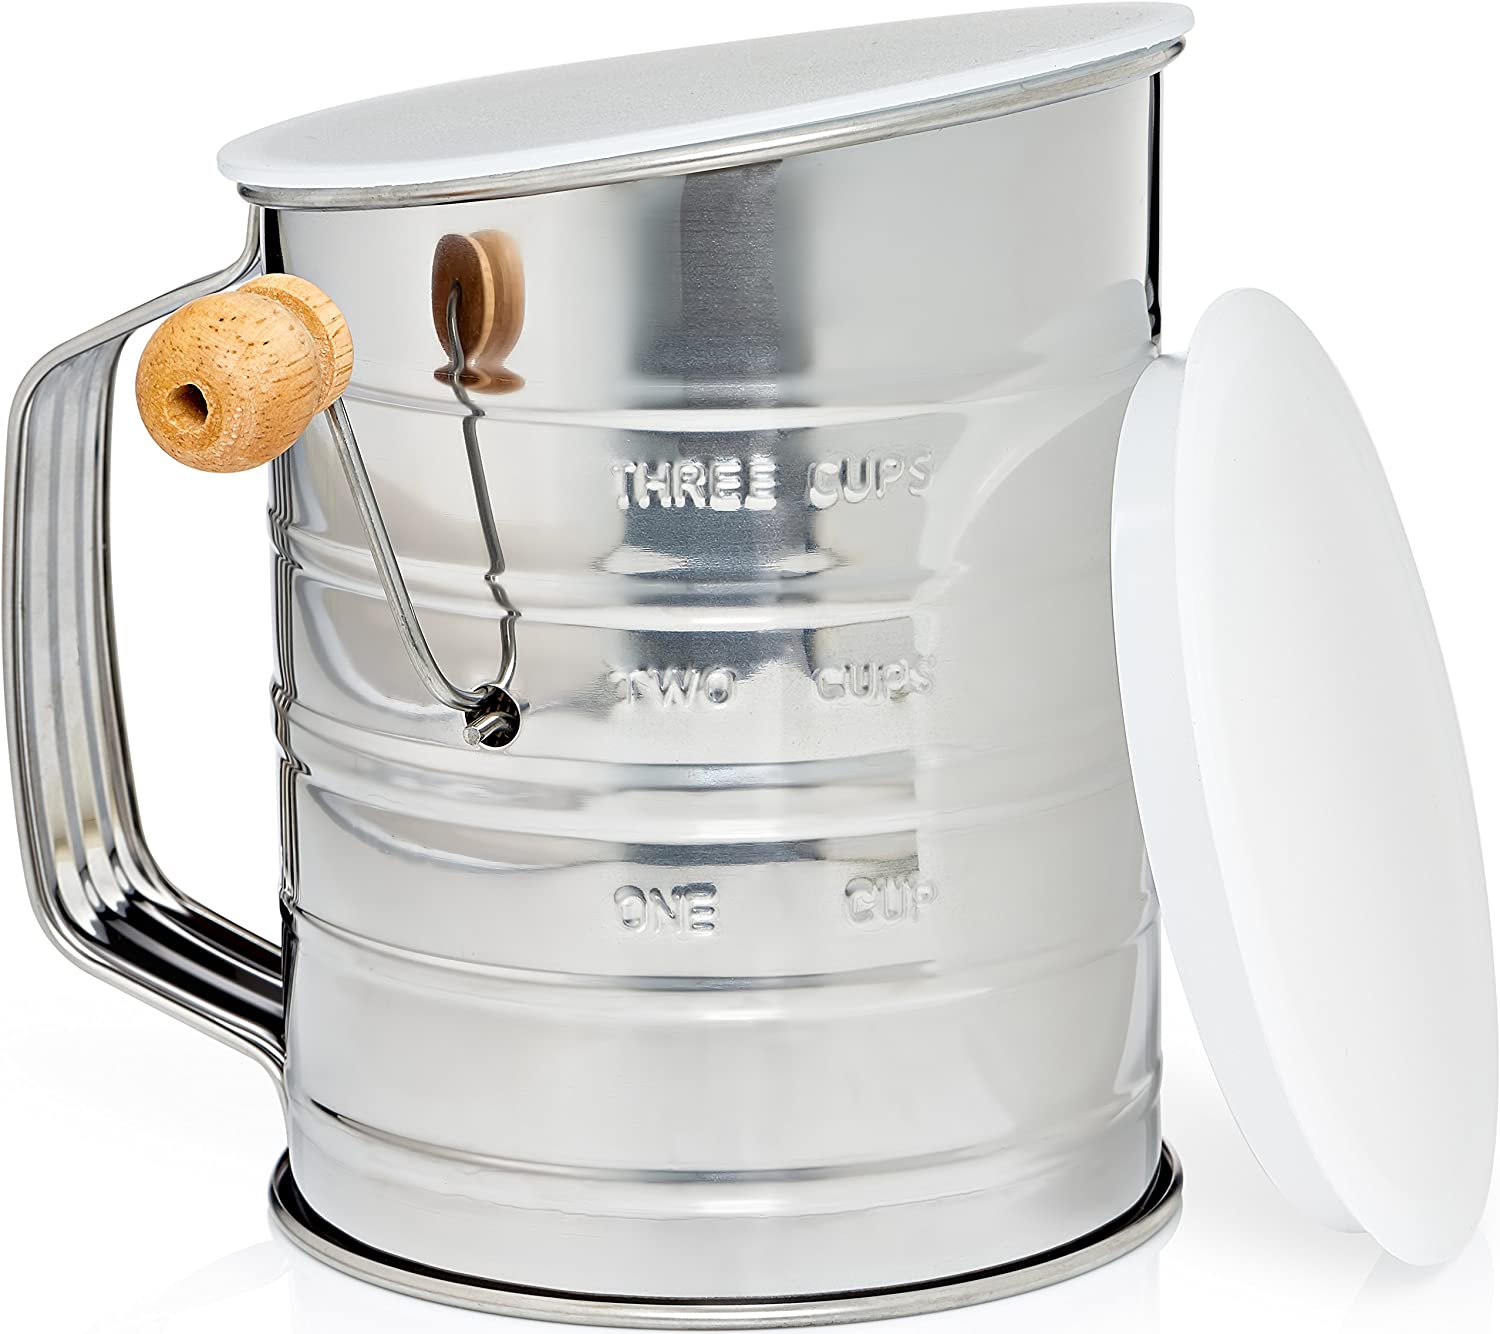 Norpro 5 Cup Stainless Steel Flour Sifter